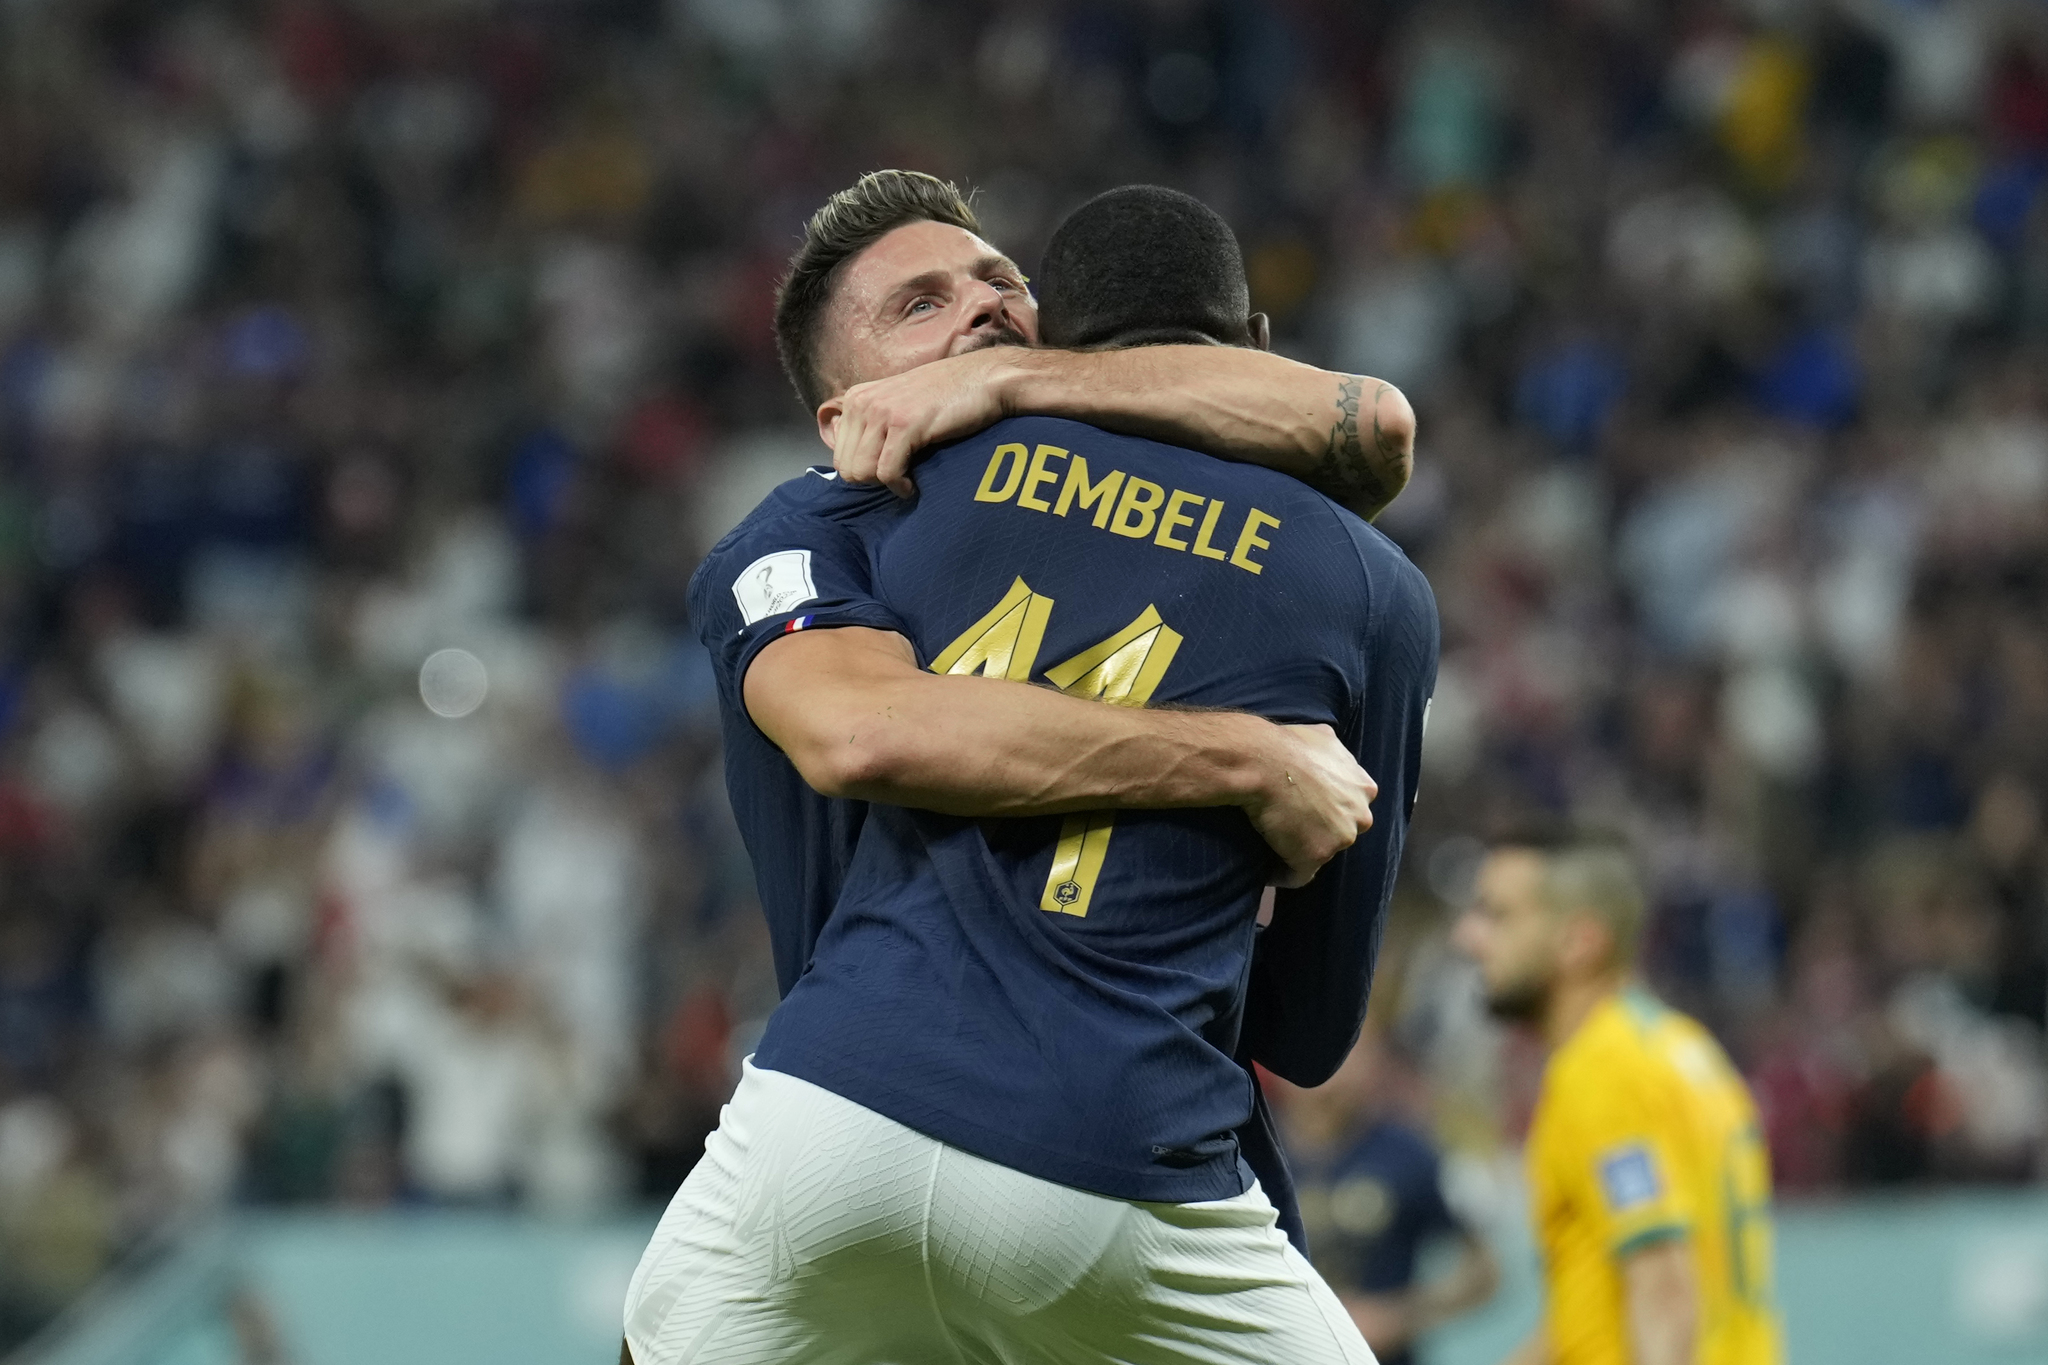 France's Olivier Giroud, left, celebrates with his teammate Ousmane Dembele after scoring his side's second goal during the World Cup group D soccer match between France and  lt;HIT gt;Australia lt;/HIT gt;, at the Al Janoub Stadium in Al Wakrah, Qatar, Tuesday, Nov. 22, 2022. (AP Photo/Francisco Seco)